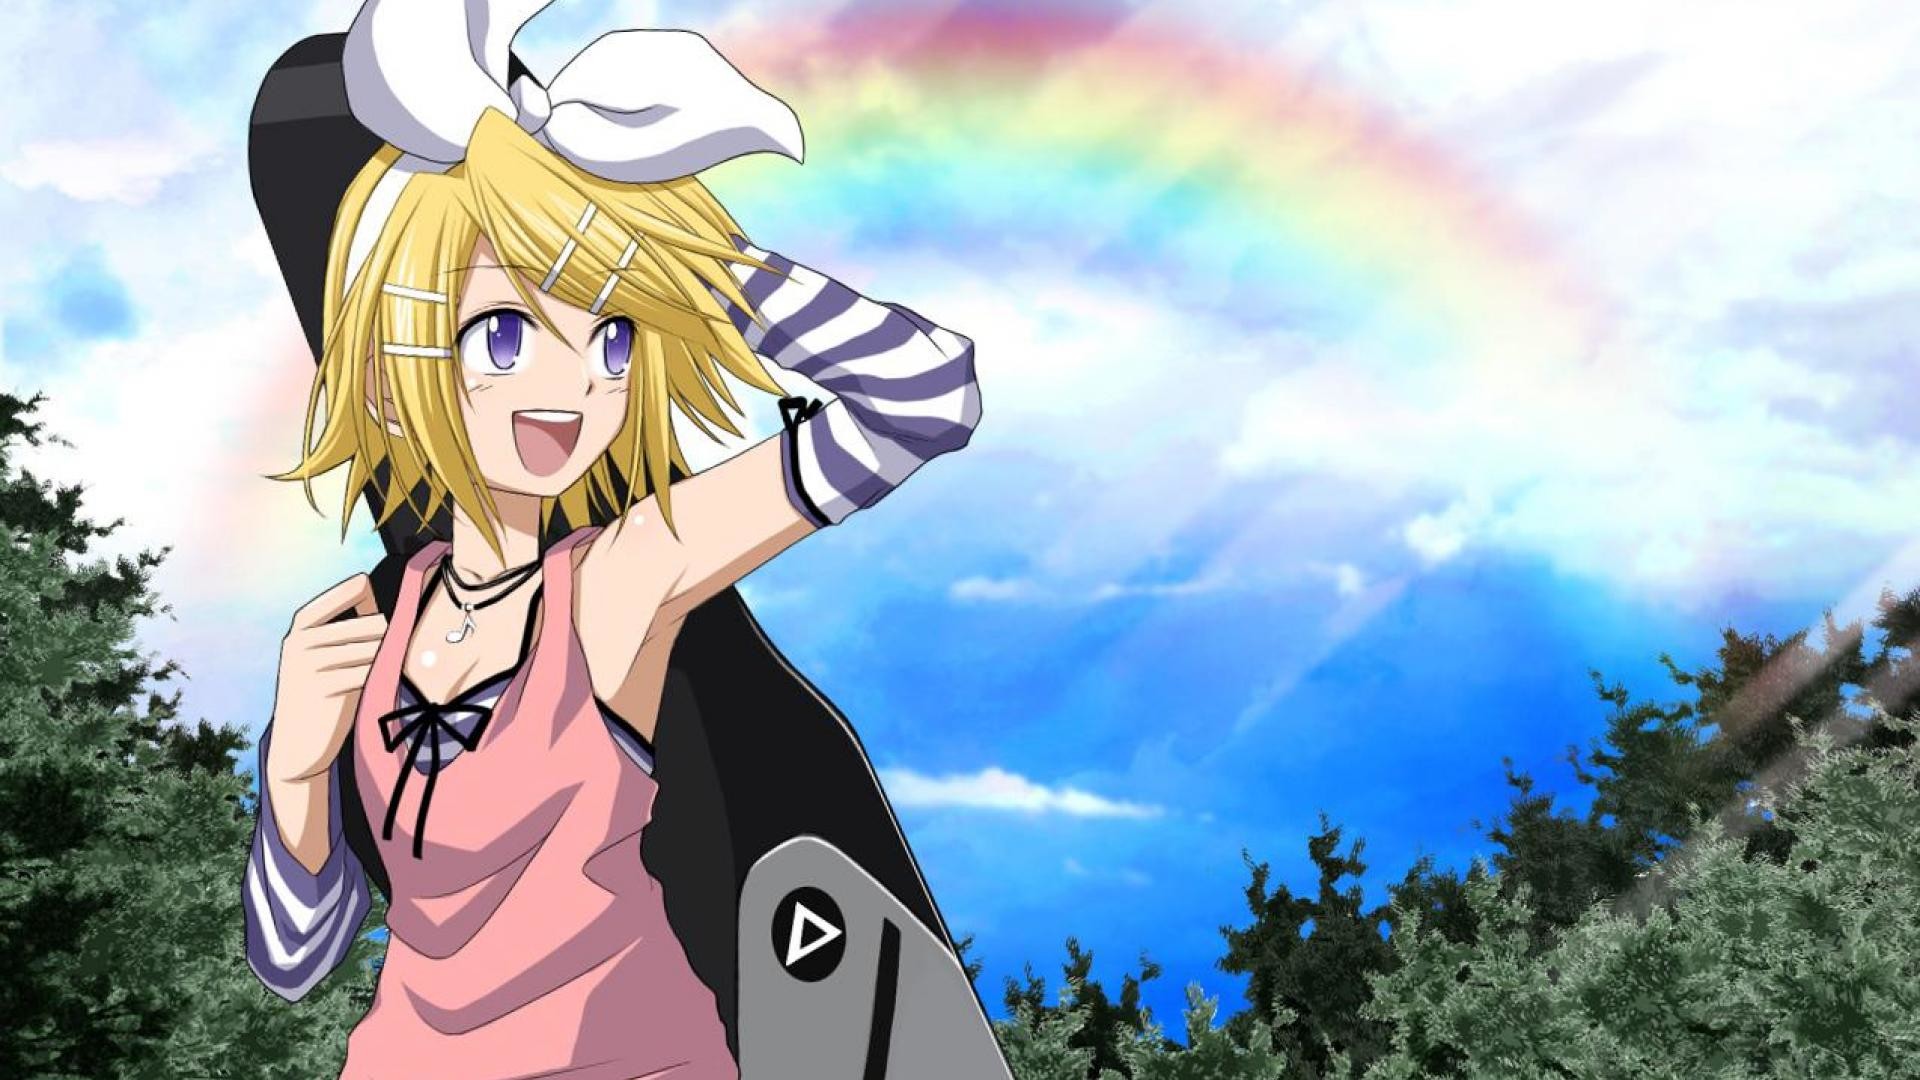 48 Rin Kagamine Wallpapers Hd Quality Rin Kagamine Images Rin 1920x1080